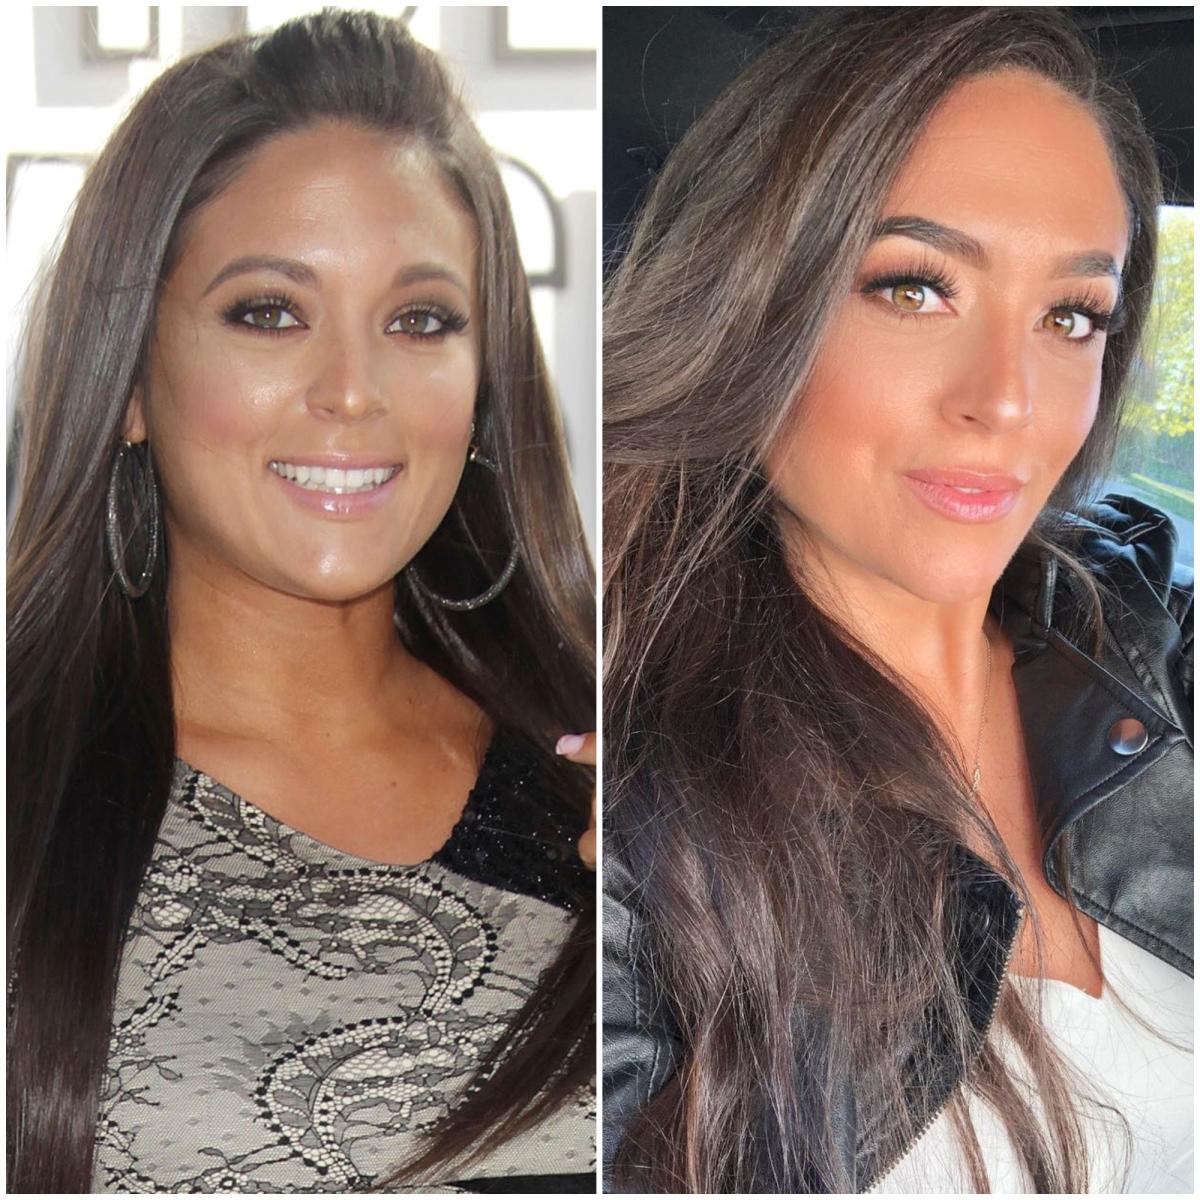 Sammi ‘Sweetheart’ Giancola’s Transformation From ‘Jersey Shore’ to Now